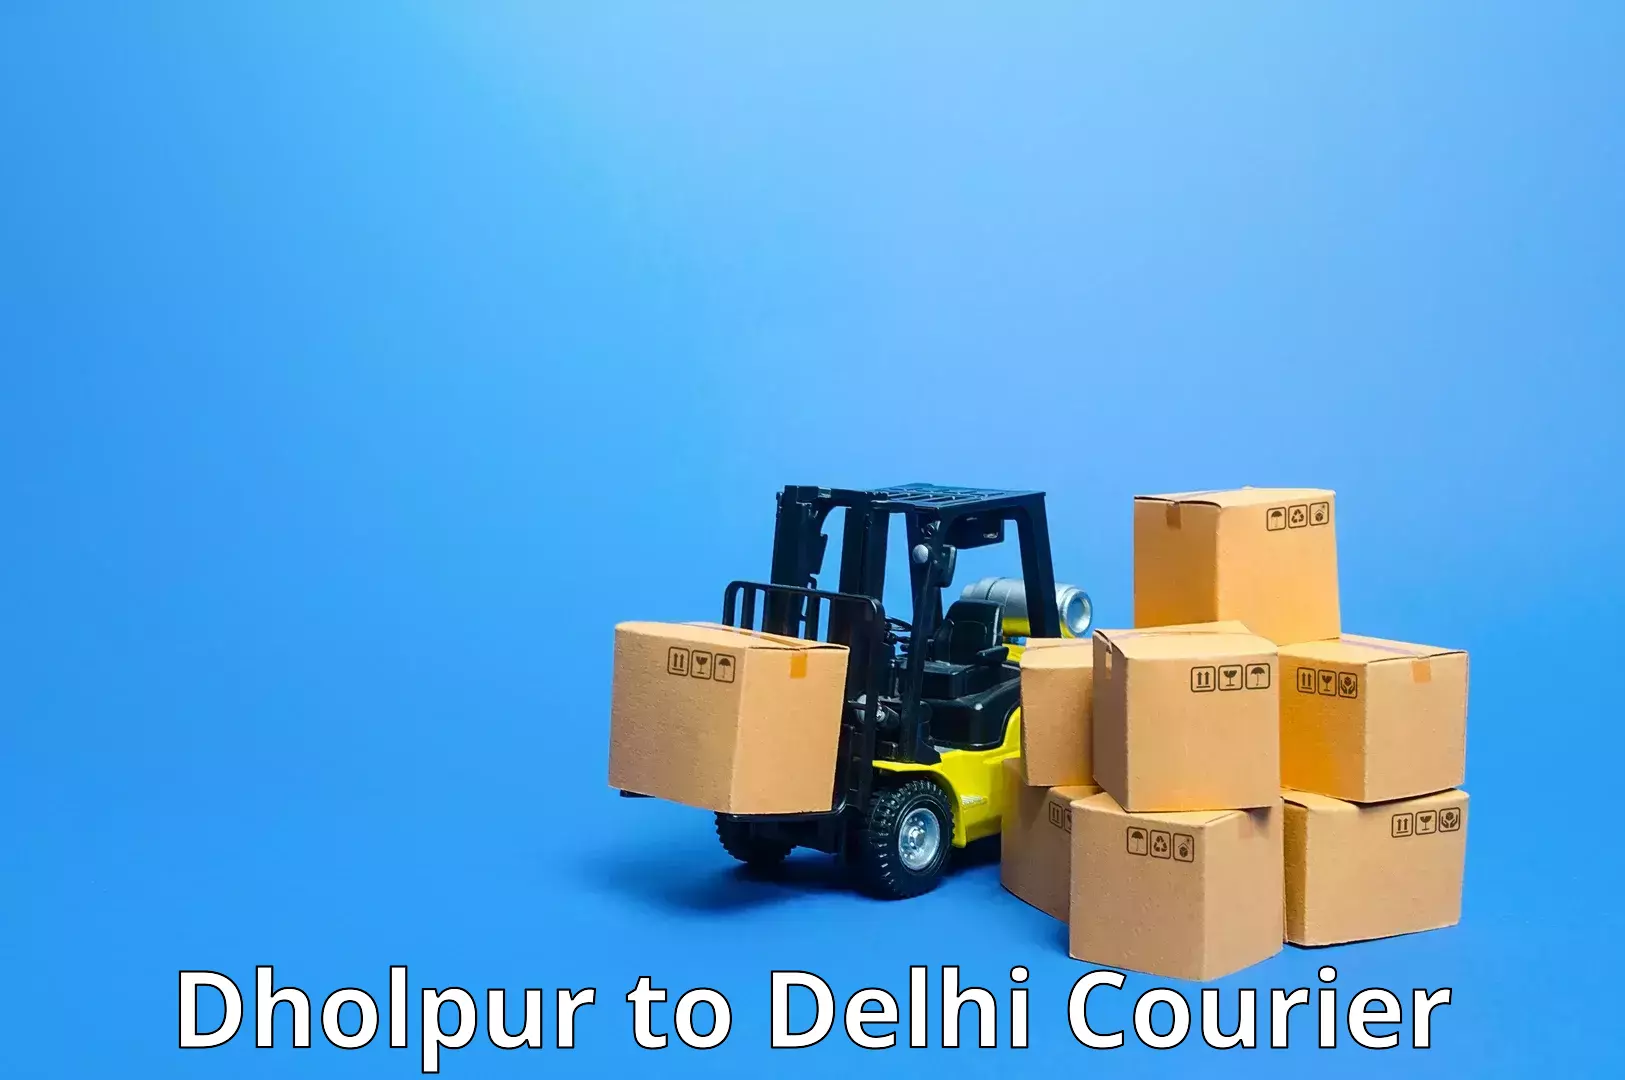 Budget-friendly shipping Dholpur to NCR